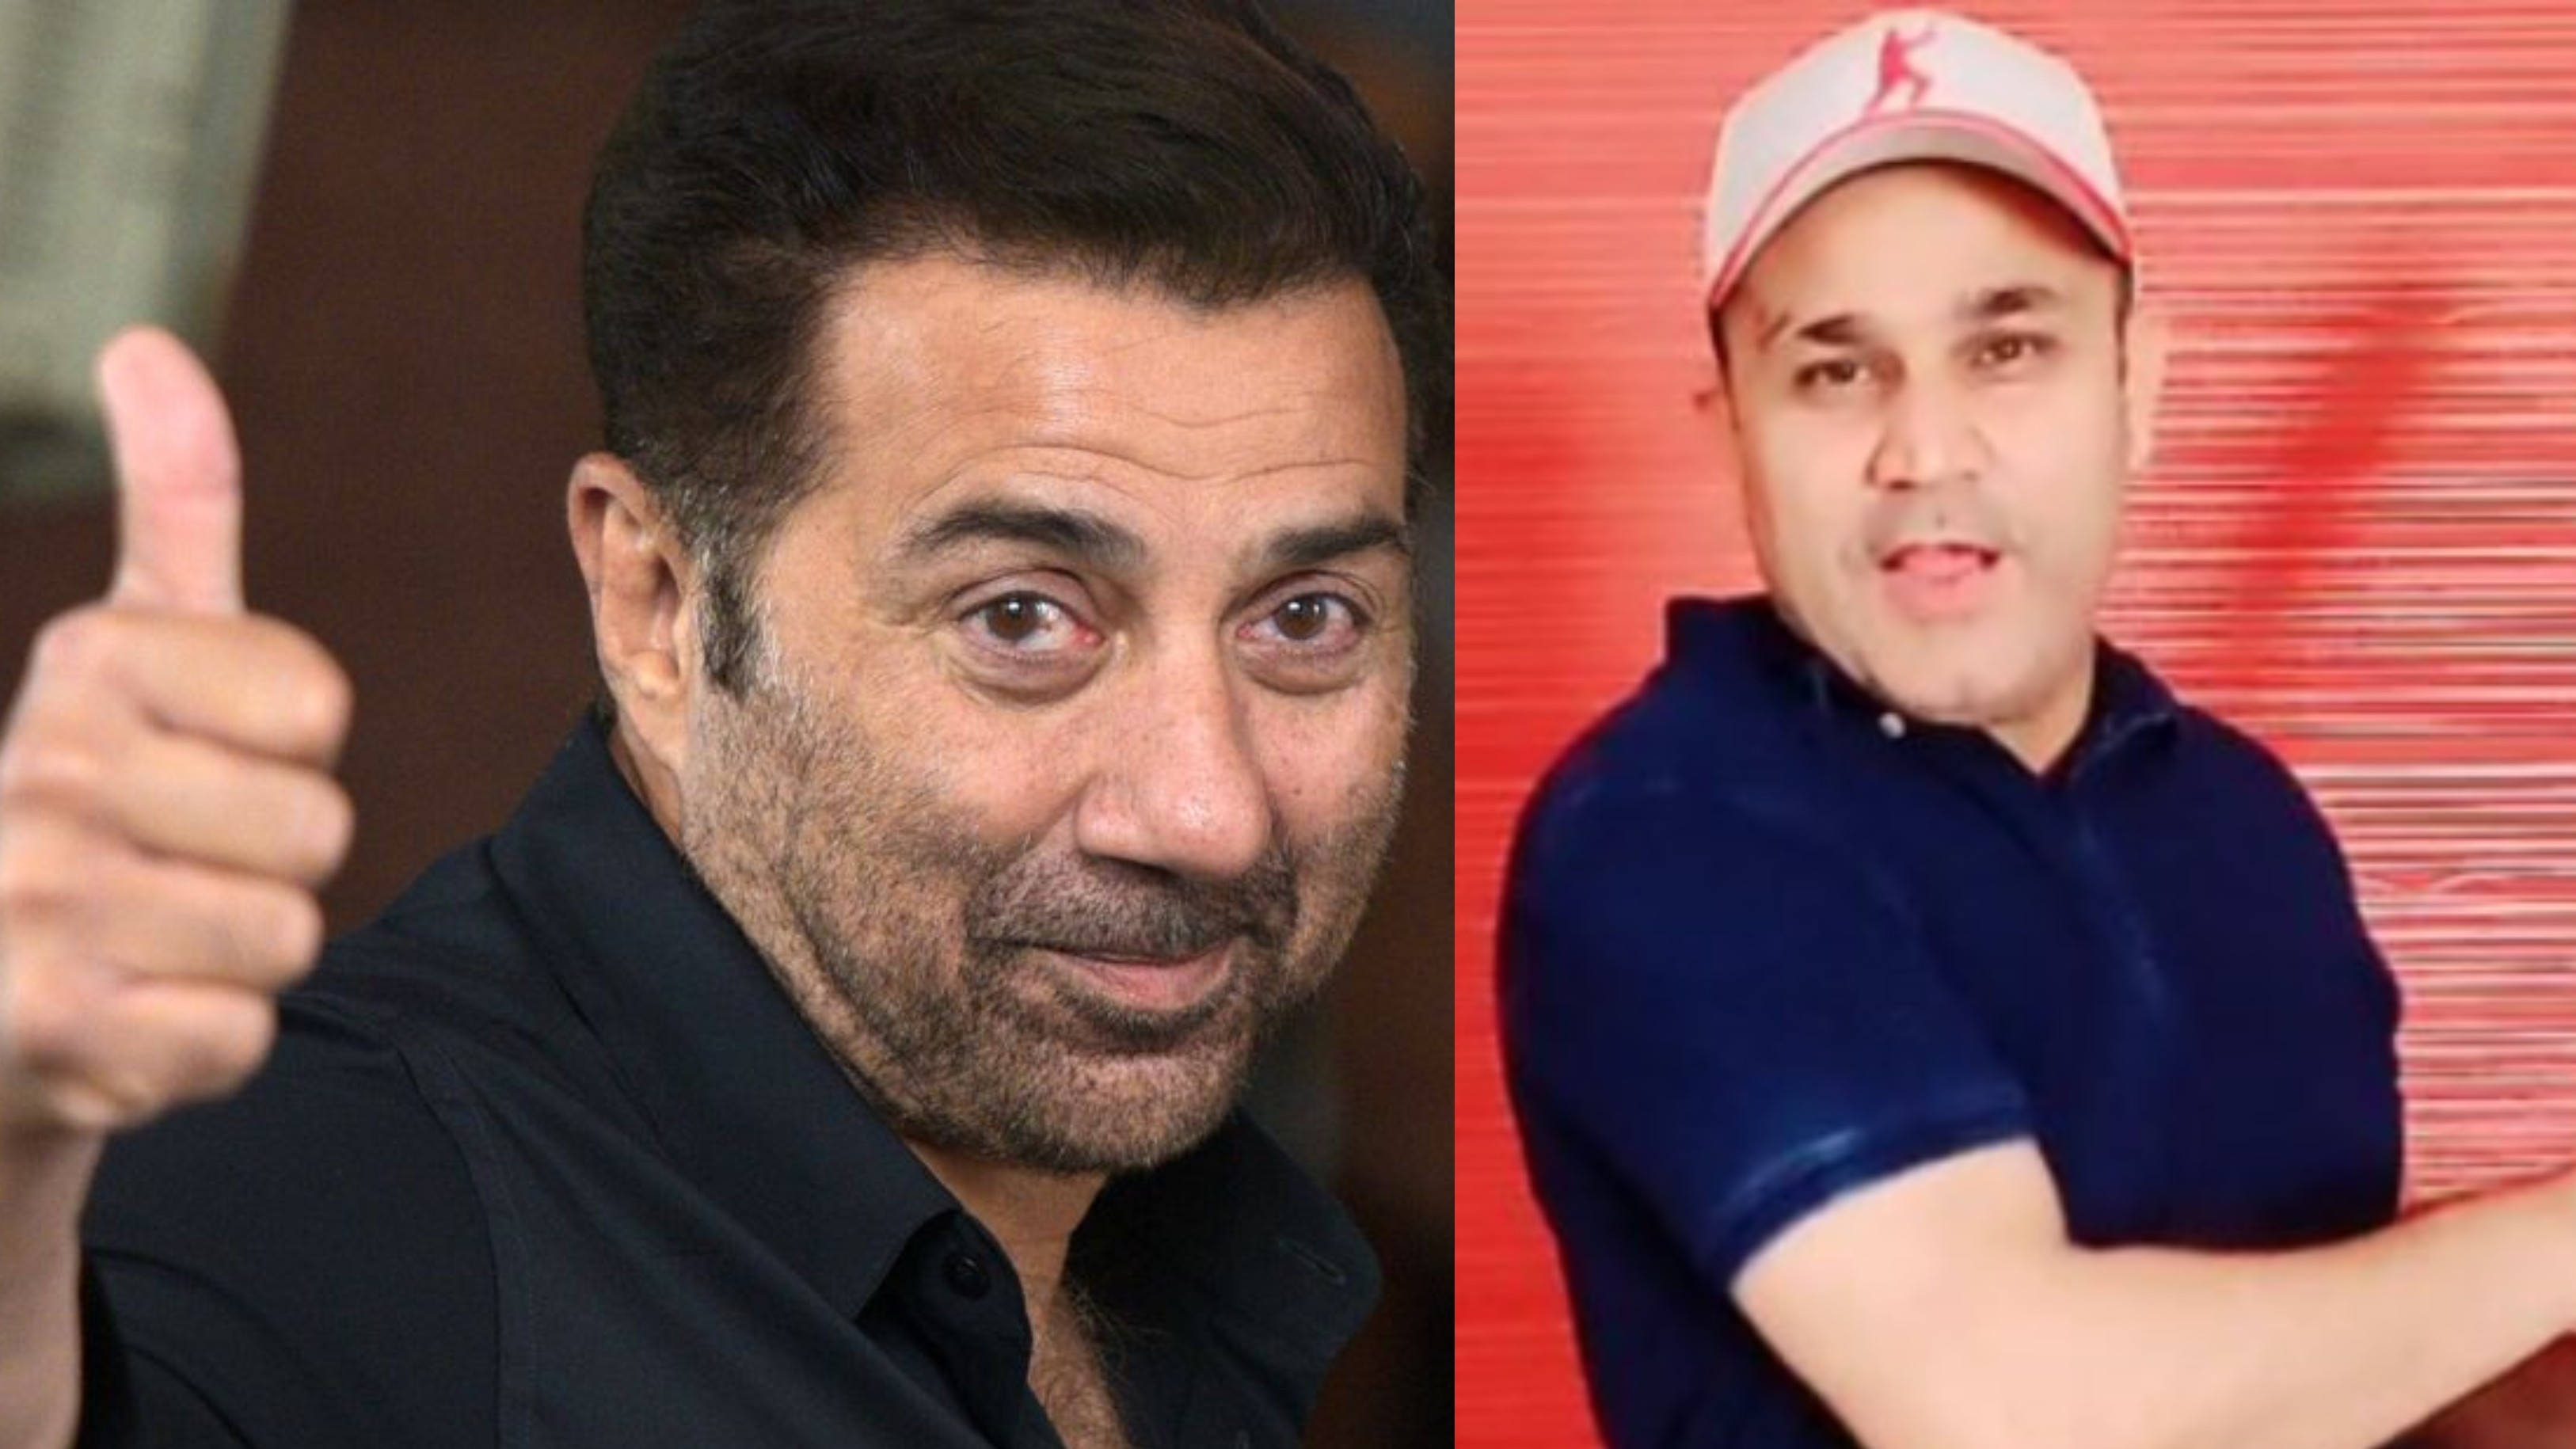 WATCH - Virender Sehwag uses Sunny Deol's famous dialogue to spread awareness amid COVID-19 lockdown